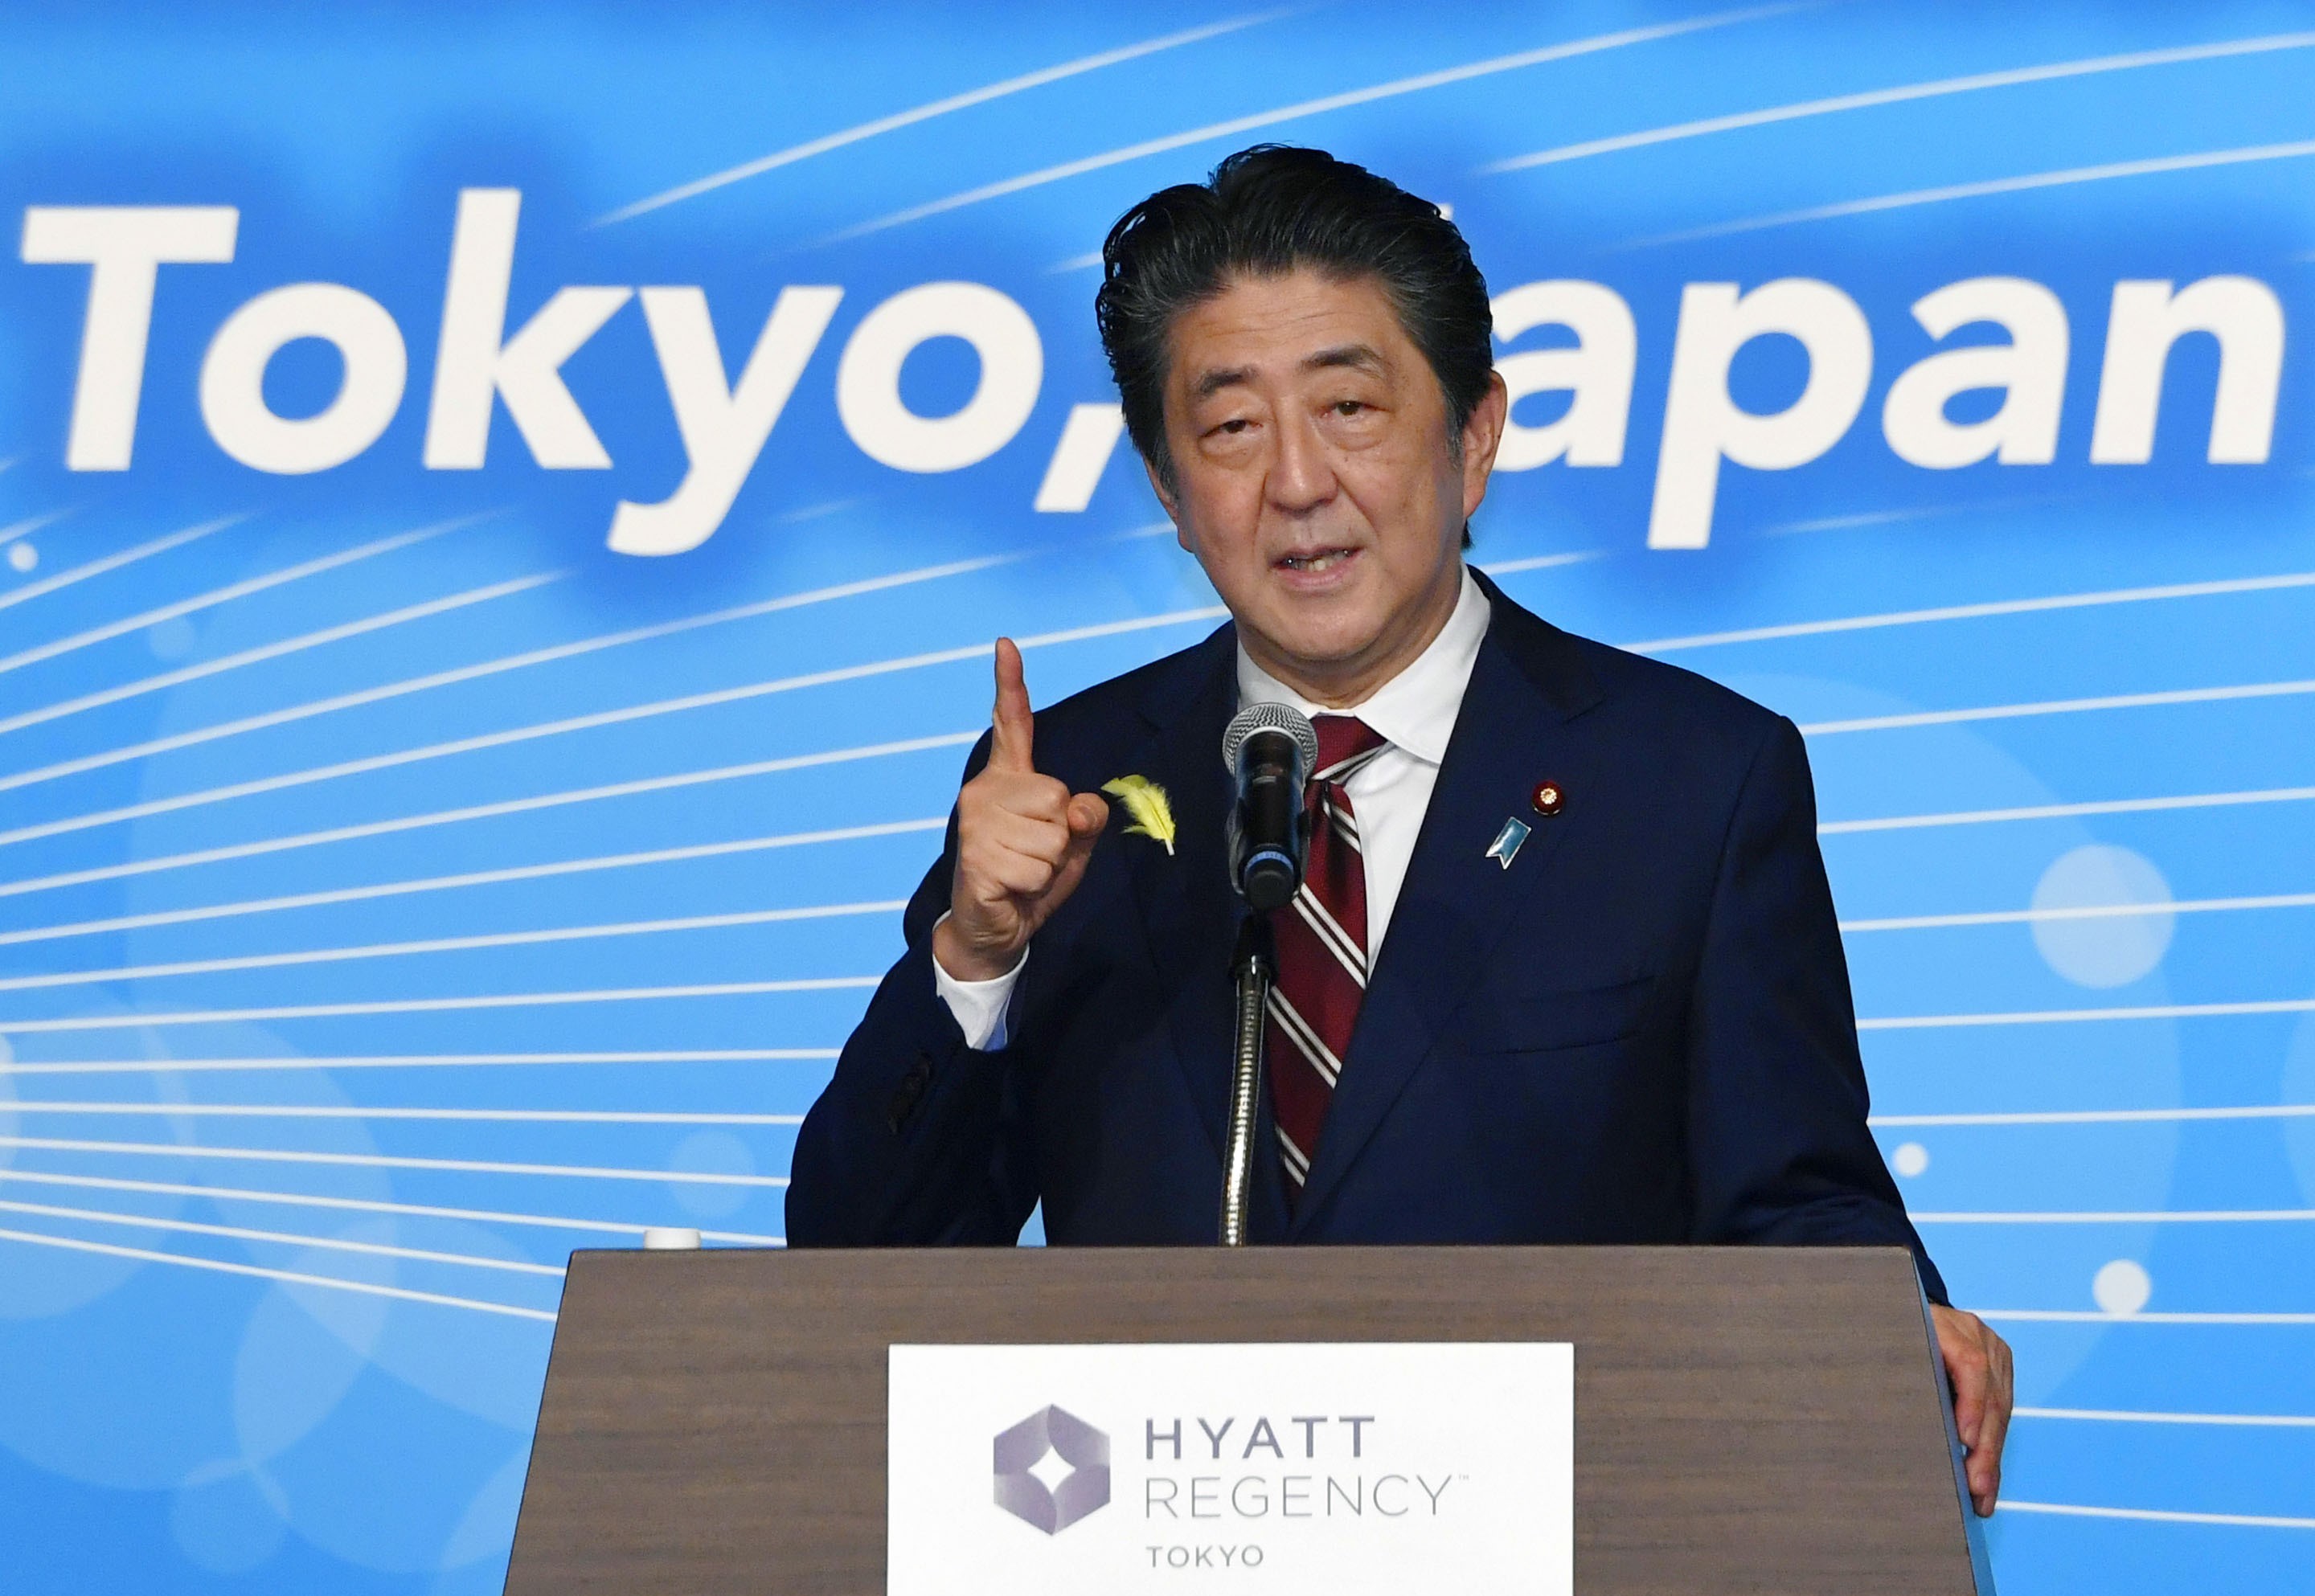 Japanese Prime Minister Shinzo Abe delivers a speech in Tokyo on July 1, 2018, during a ministerial meeting of 16 Asia-Pacific countries negotiating the Regional Comprehensive Economic Partnership trade deal. Photo: Kyodo